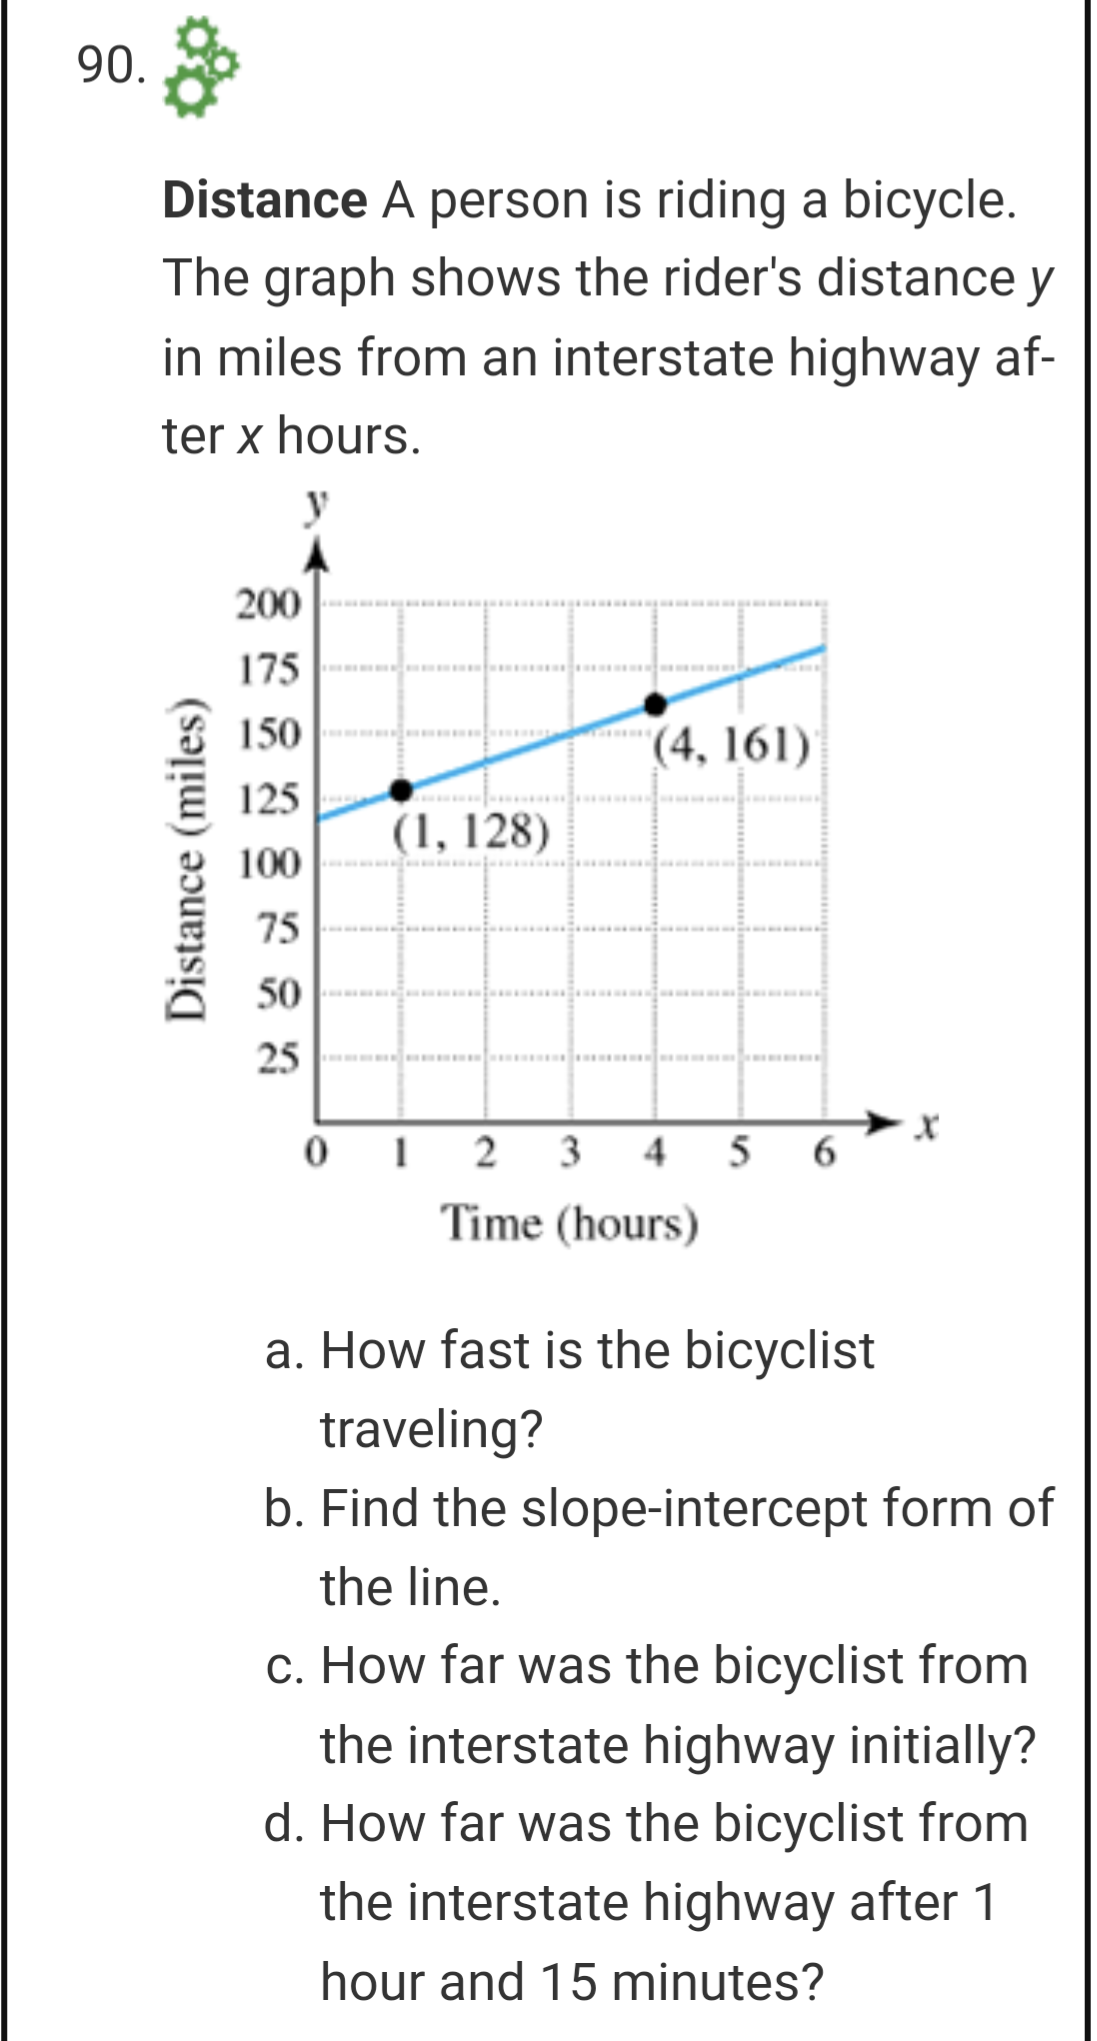 90.
Distance A person is riding a bicycle.
The graph shows the rider's distance y
in miles from an interstate highway af-
ter x hours.
200
175
150
(4, 161)
125
(1, 128)
100
75
50
25
3
4
5
6
Time (hours)
a. How fast is the bicyclist
traveling?
b. Find the slope-intercept form of
the line.
c. How far was the bicyclist from
the interstate highway initially?
d. How far was the bicyclist from
the interstate highway after 1
hour and 15 minutes?
Distance (miles)
